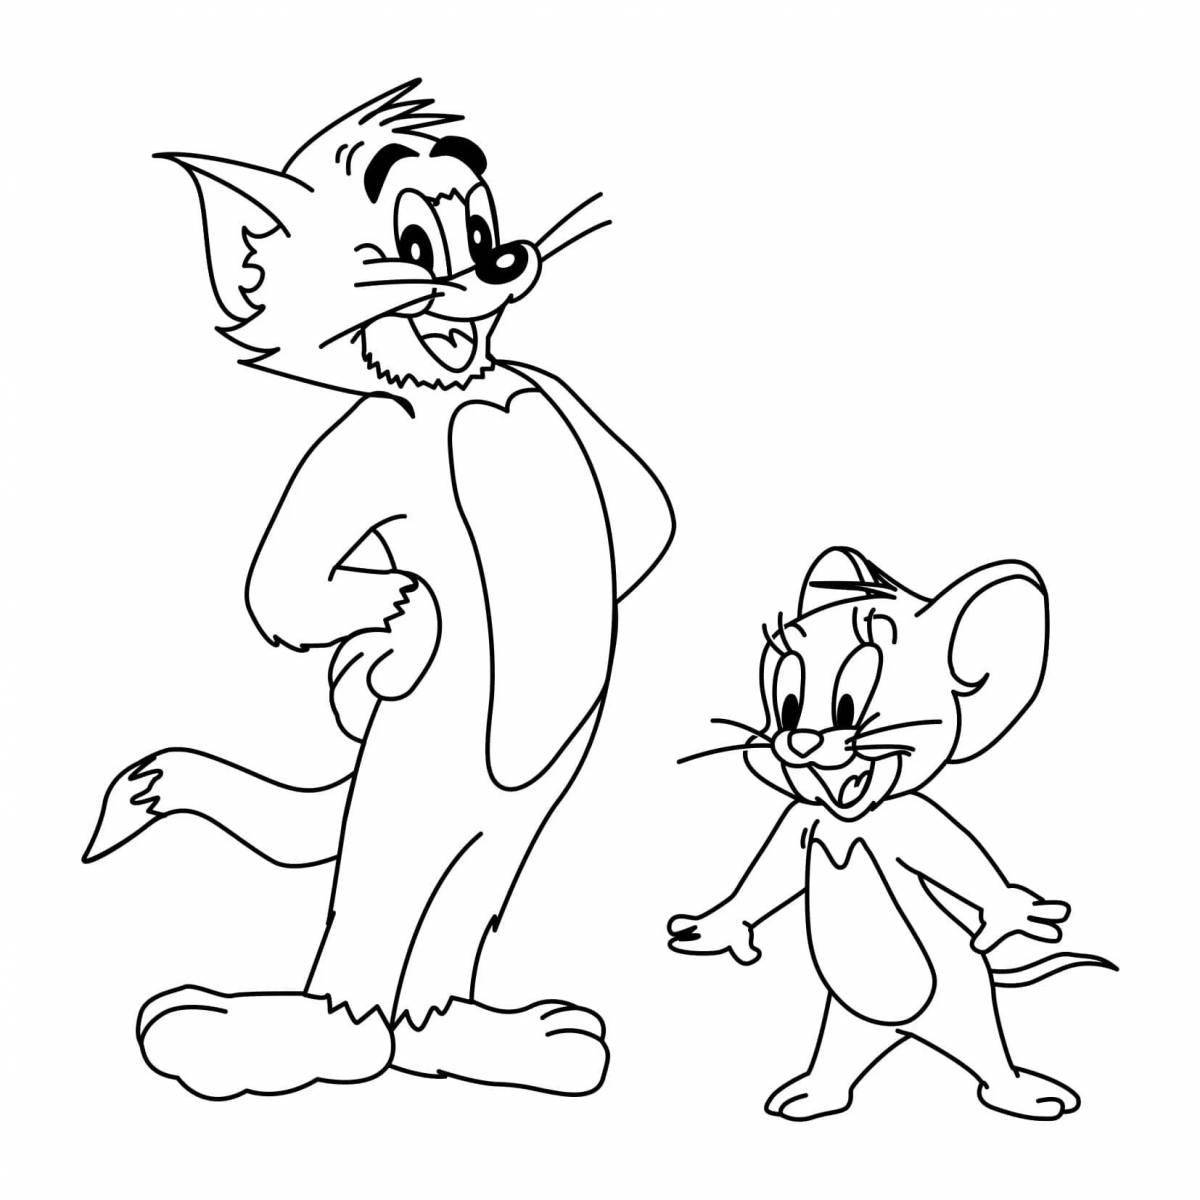 Living tom and jerry coloring book